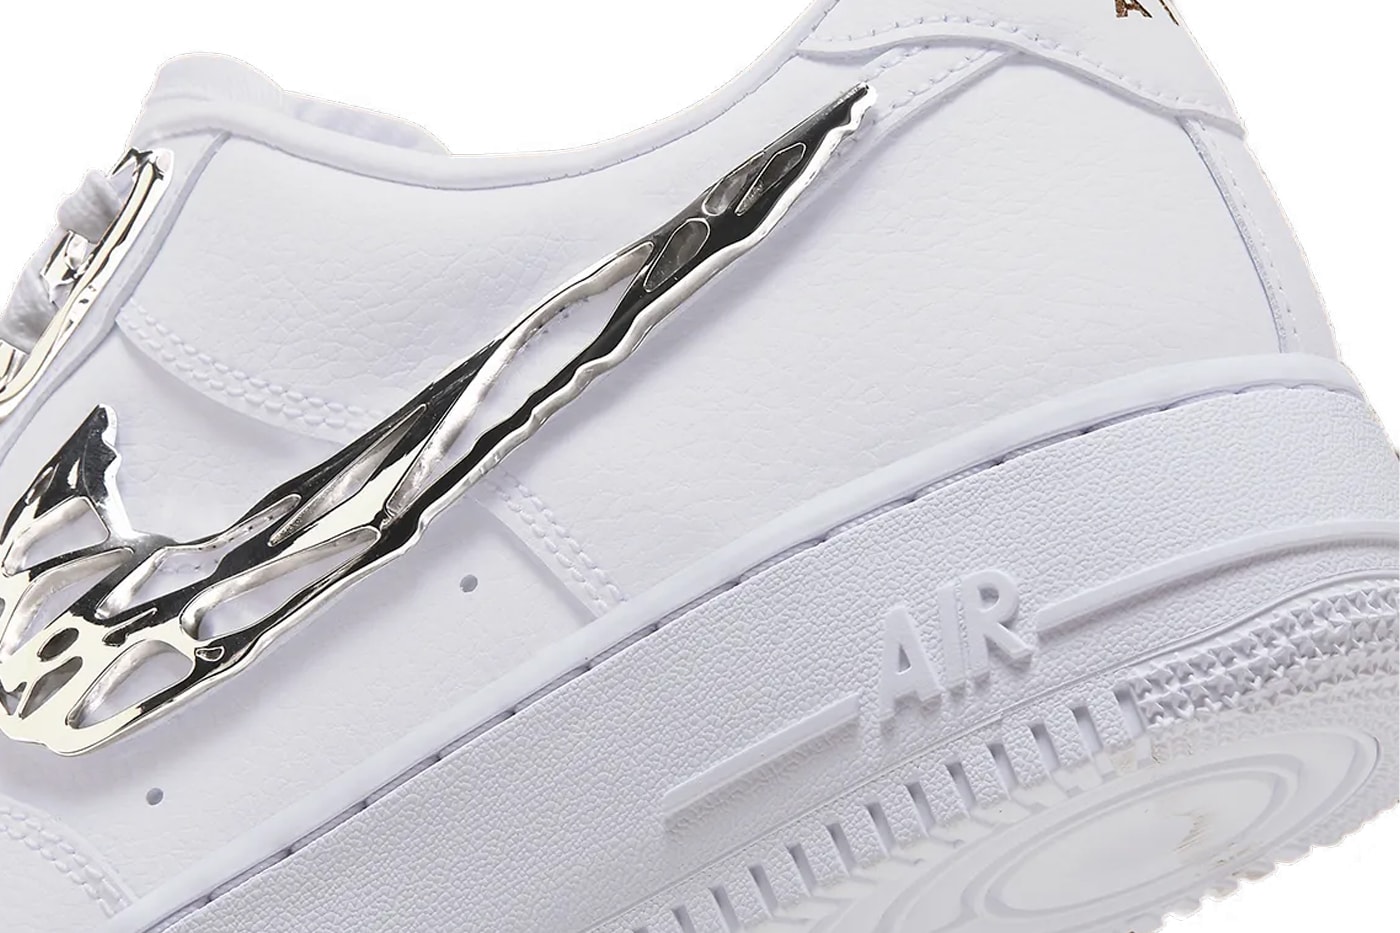 Nike Air Force 1 "Molten Metal" Is Adorned in Silver Details Release Info silver buckles swoosh